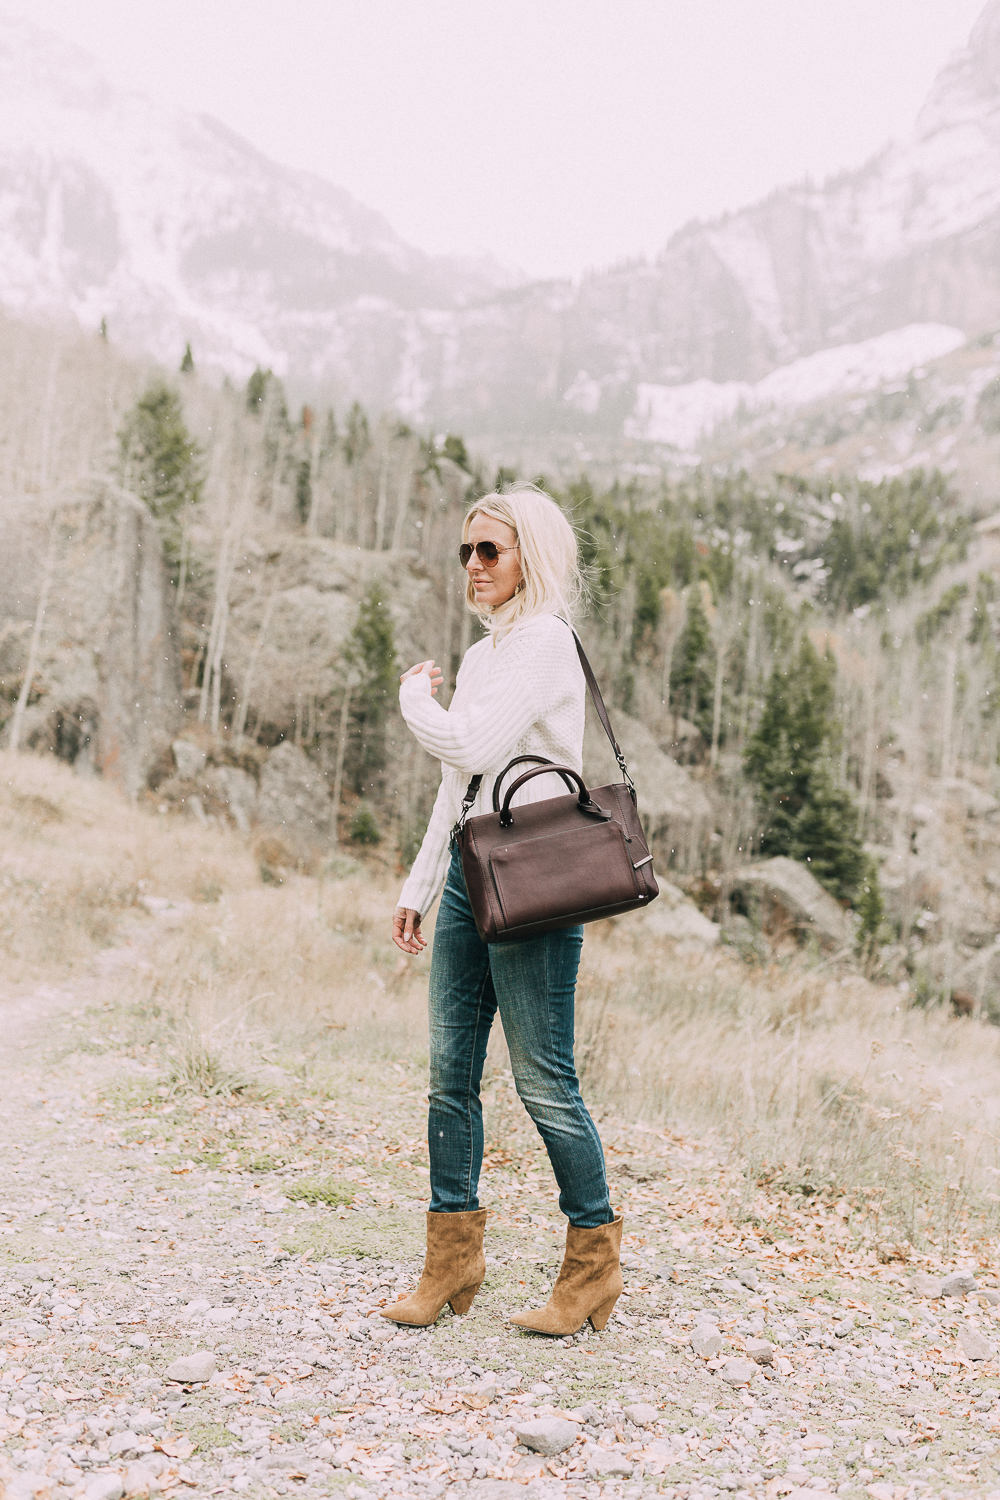 Suede Booties by Vince Camuto paired with white turtleneck cable knit sweater, burgundy tote bag, and white wool coat on blonde woman in the mountains